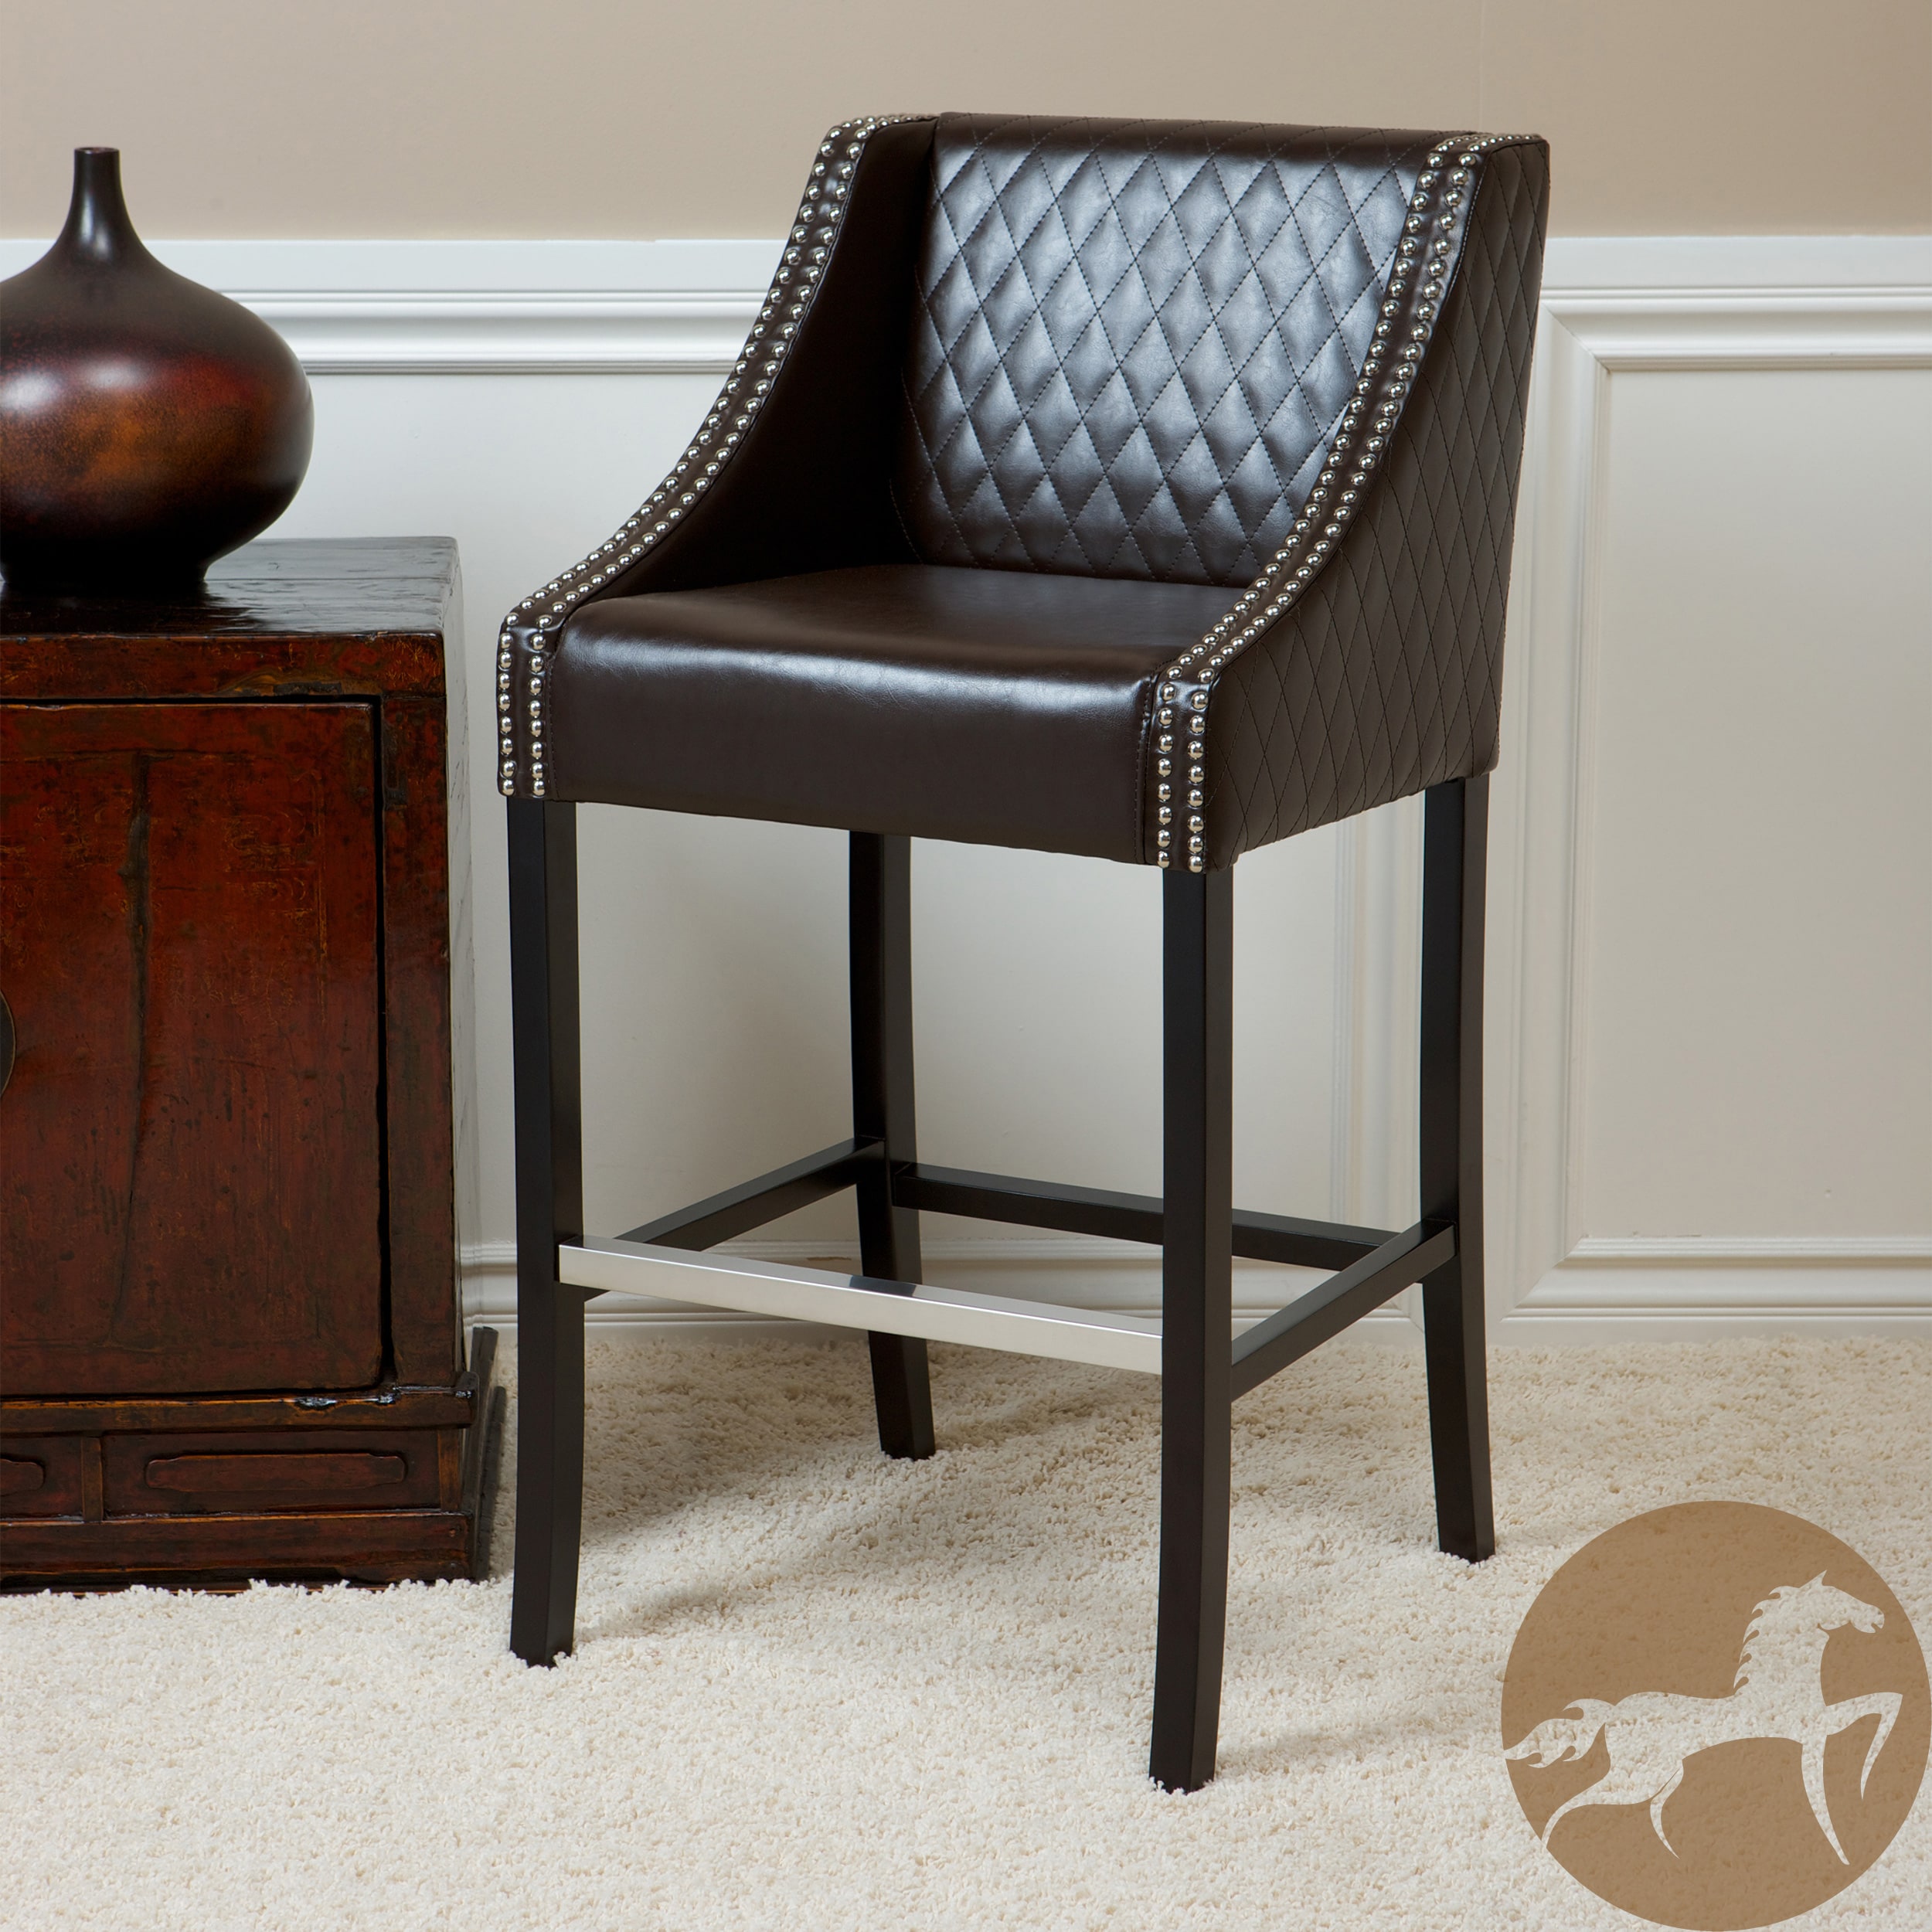 brown quilted bonded leather bar stool today $ 179 99 sale $ 161 99